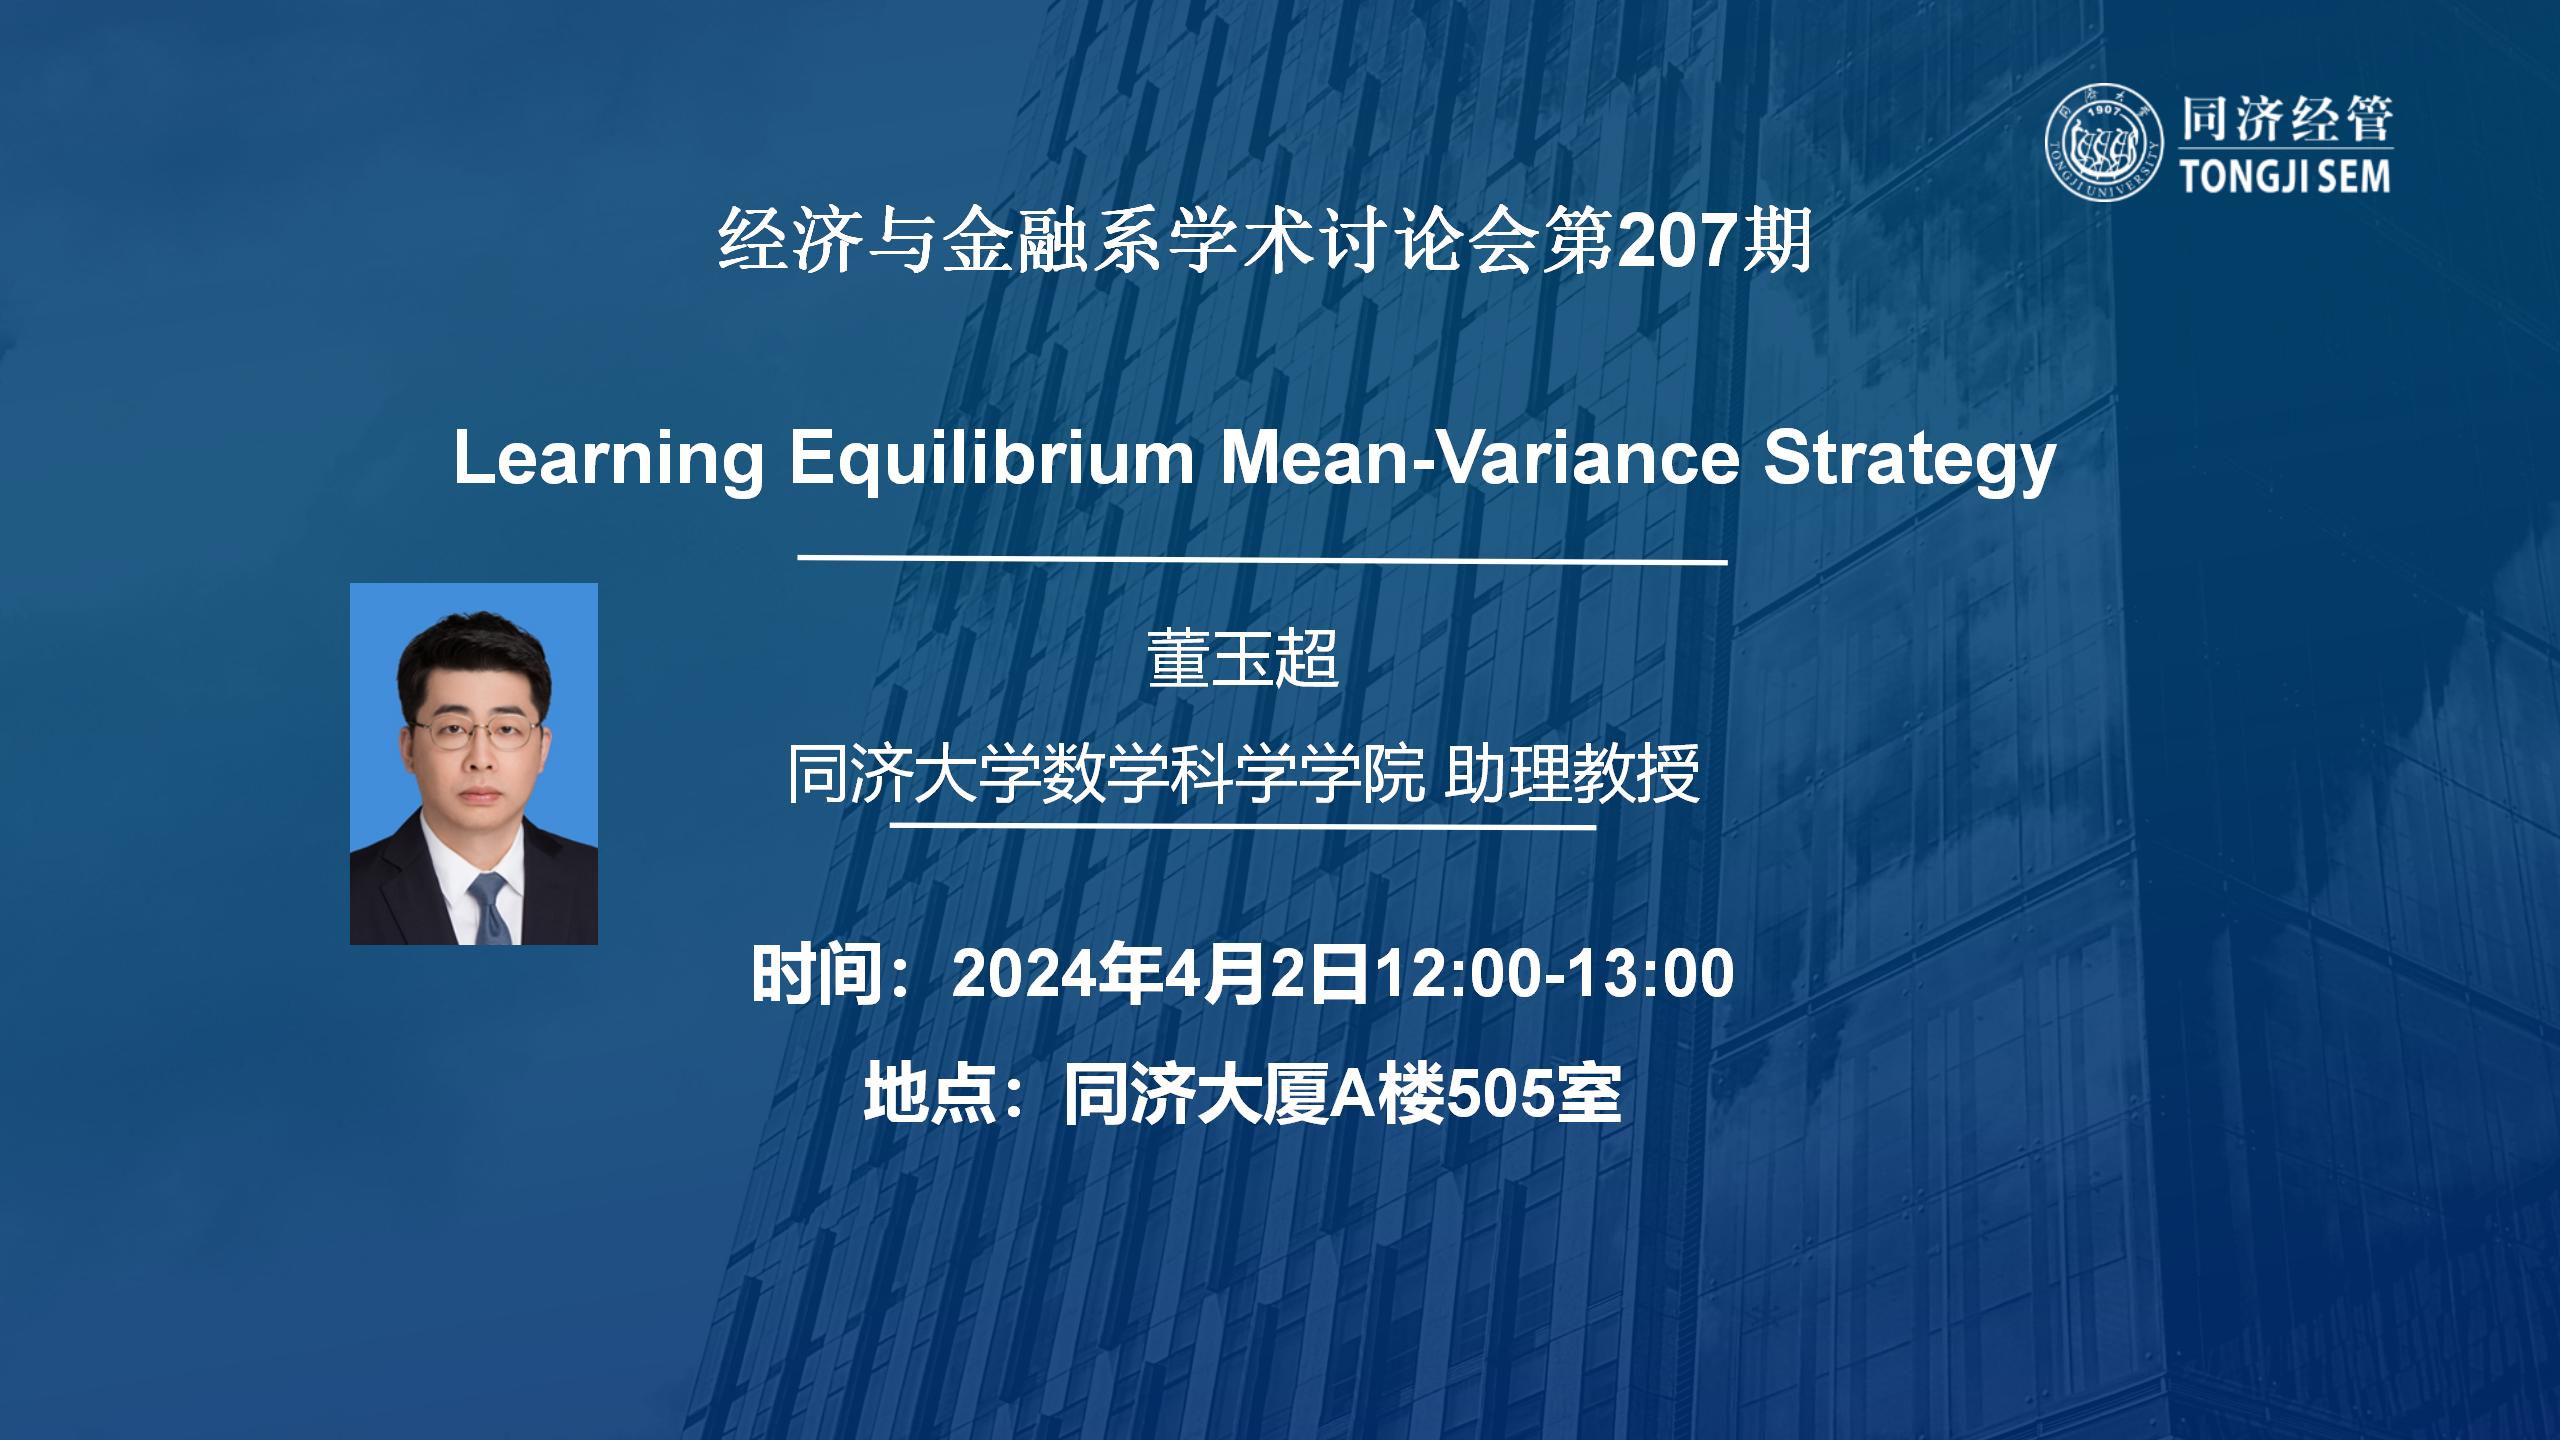 Learning Equilibrium Mean-Variance Strategy